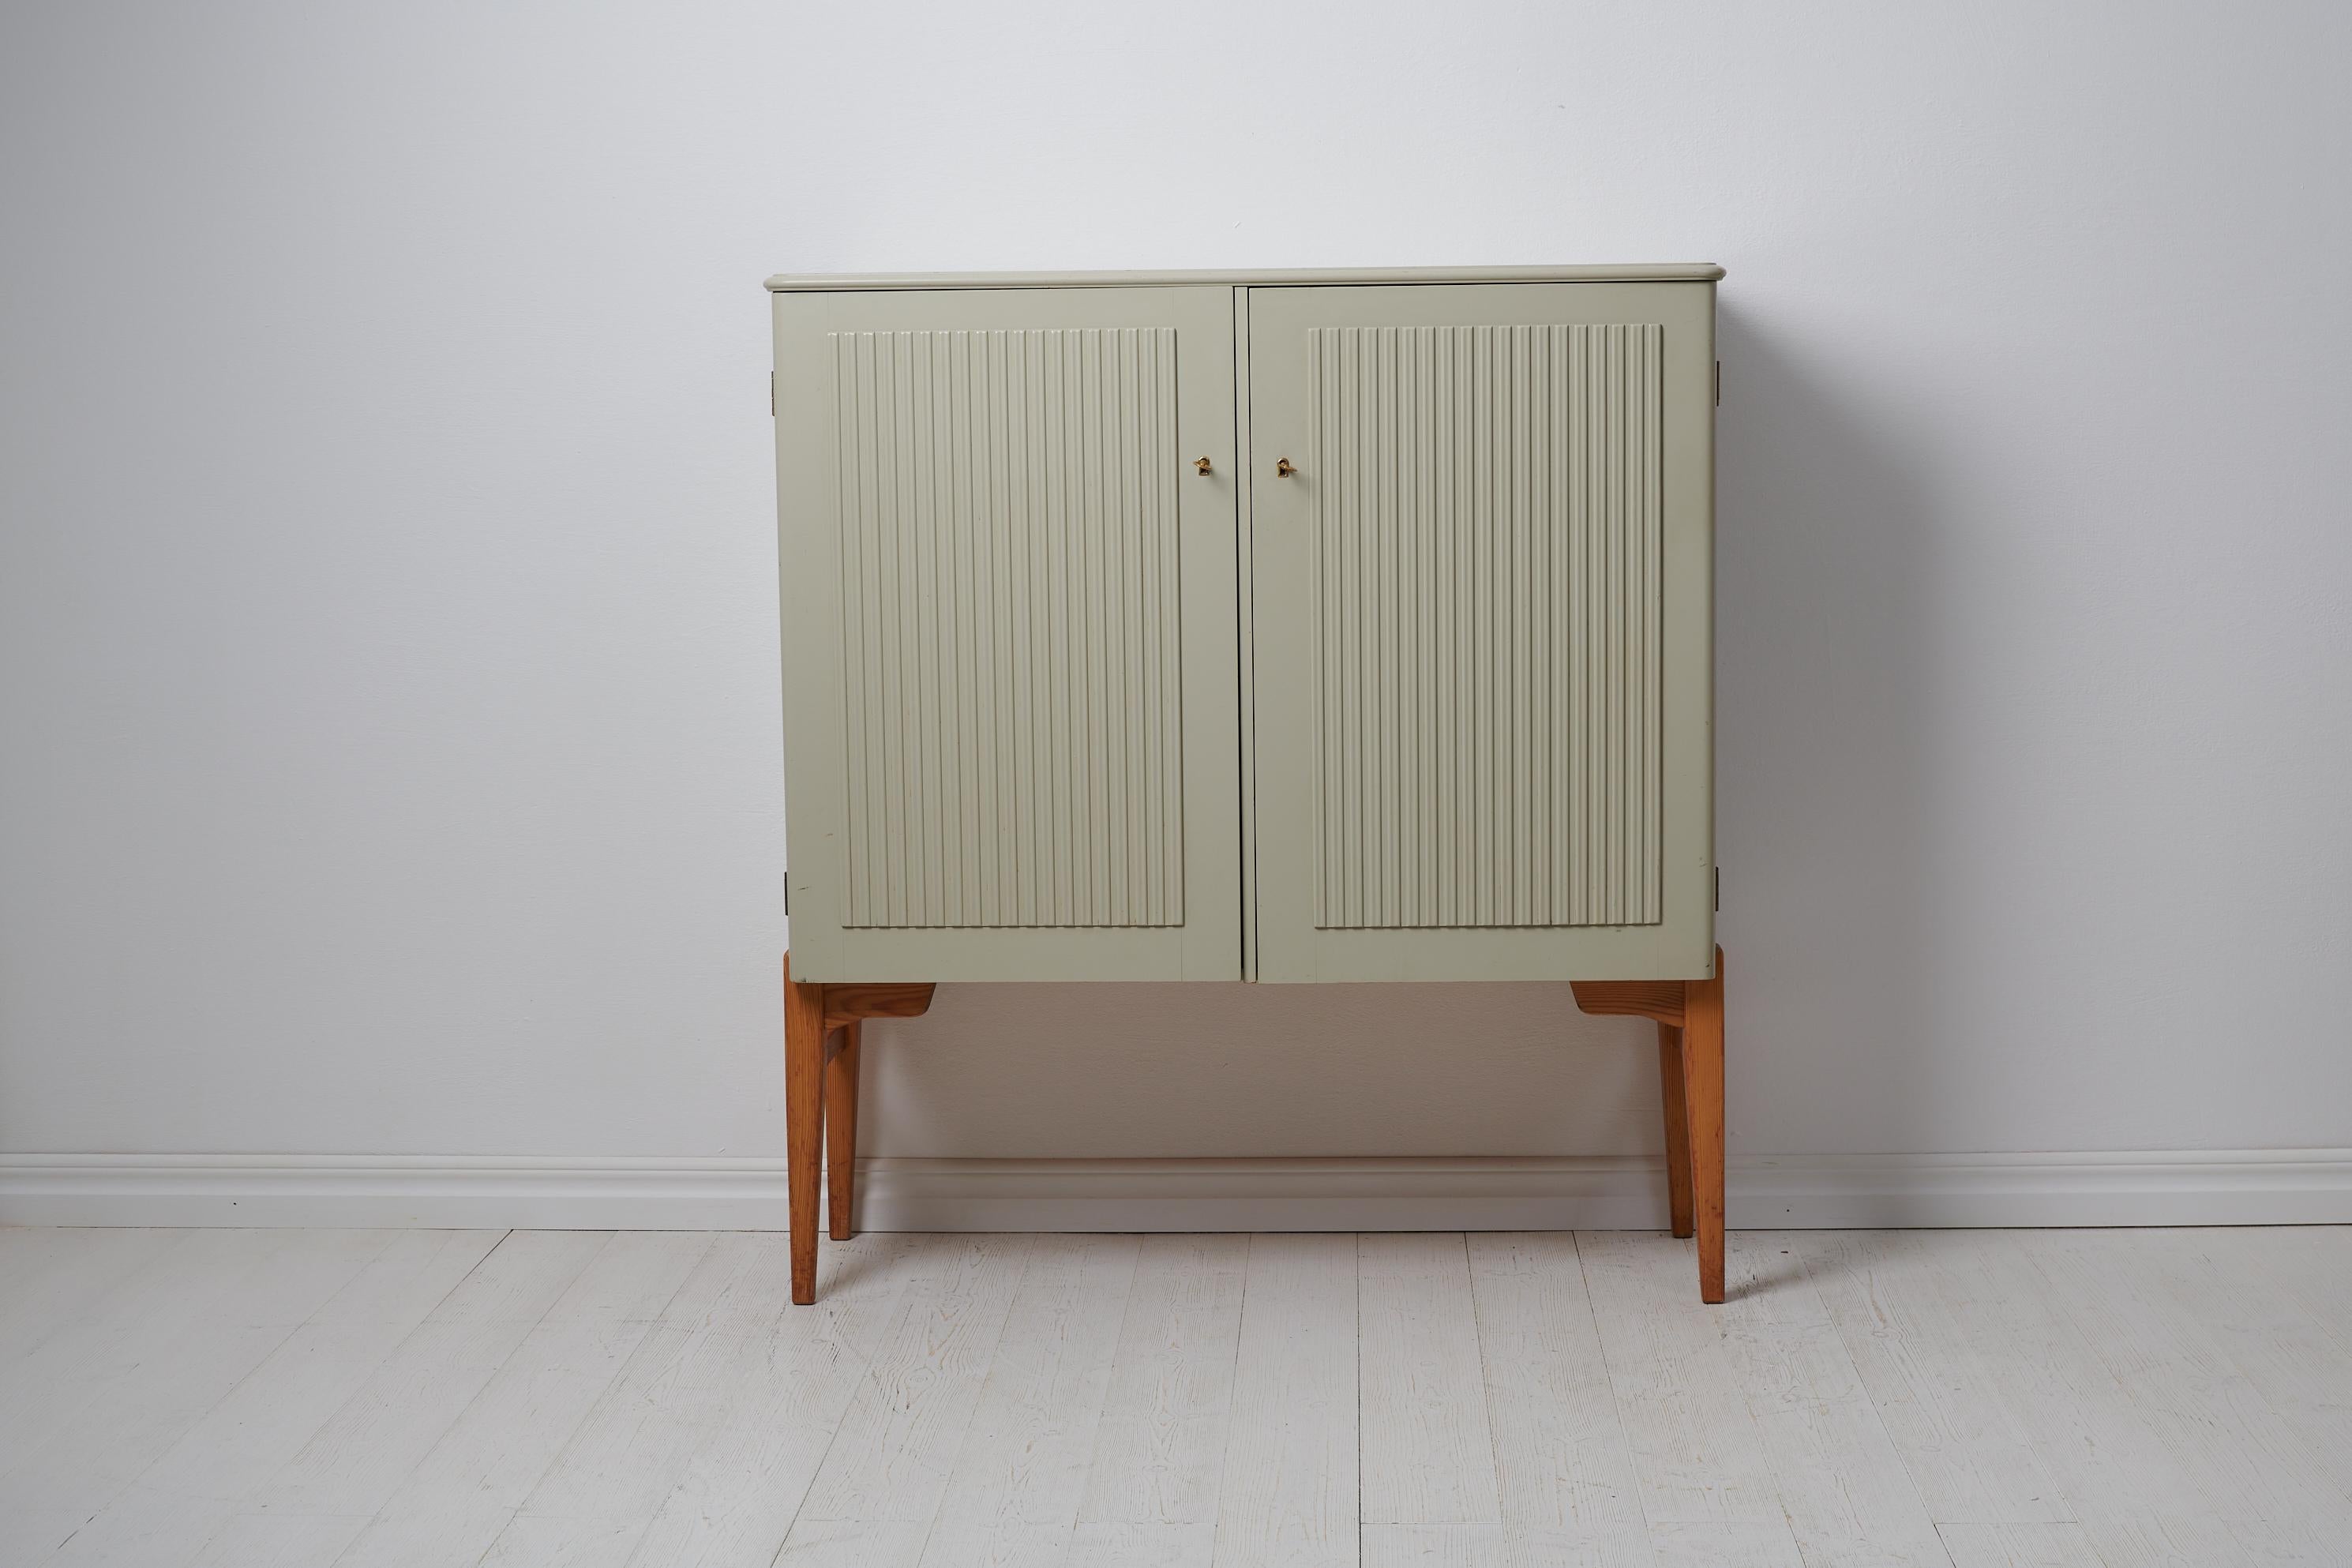 Swedish modern pine cabinet from the Mid-20th Century, around 1950 in painted Swedish pine. The legs of the cabinet are in bare wood which creates a contrast to the painted doors and frame. The doors have a fluted decor and open to an interior with